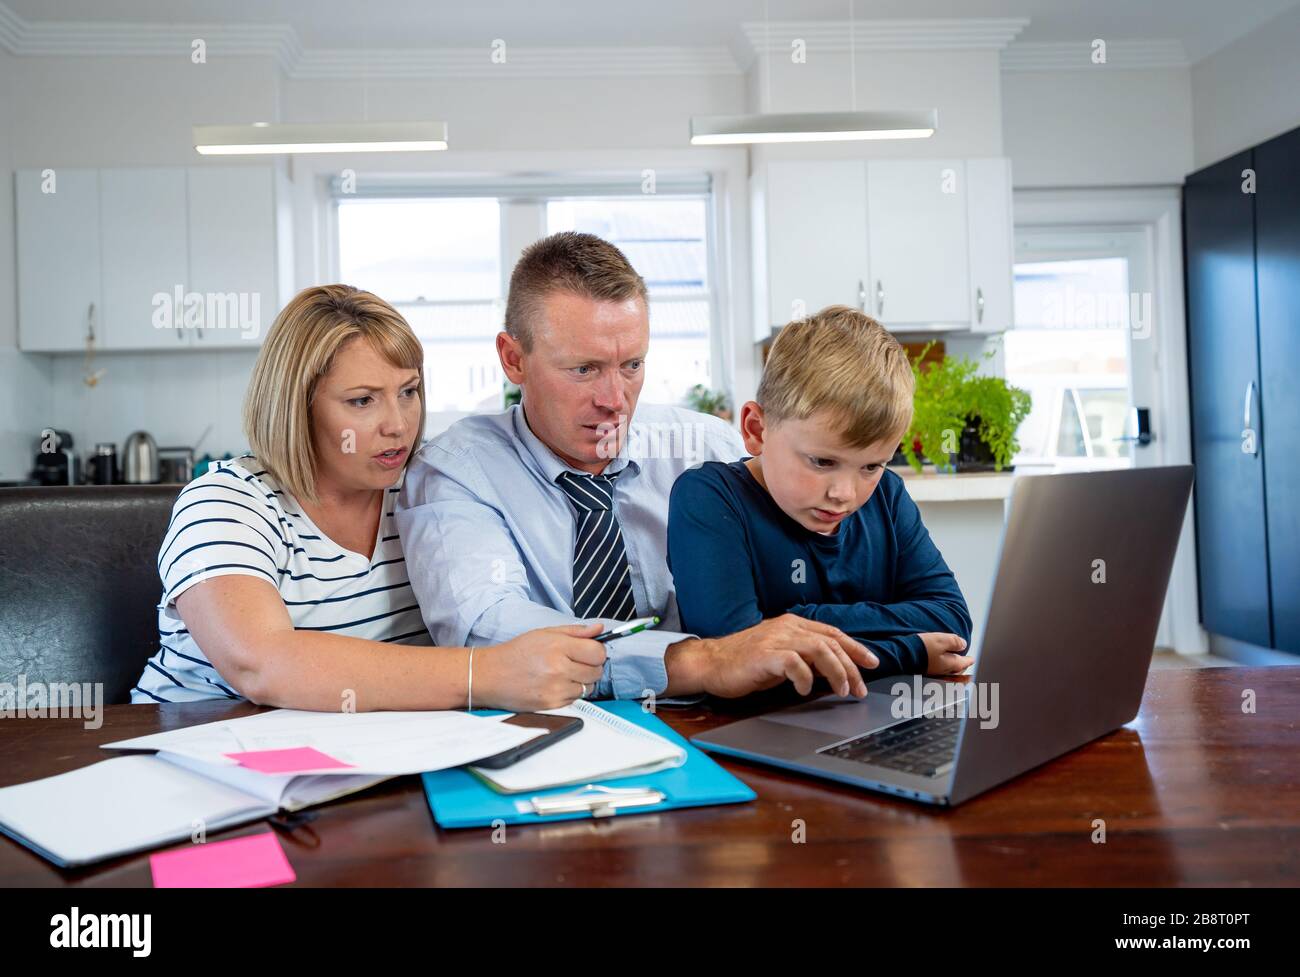 Coronavirus outbreak. Family in quarantine, kids fighting and parents in distress over home finances, job loss, school shutdowns and small business de Stock Photo